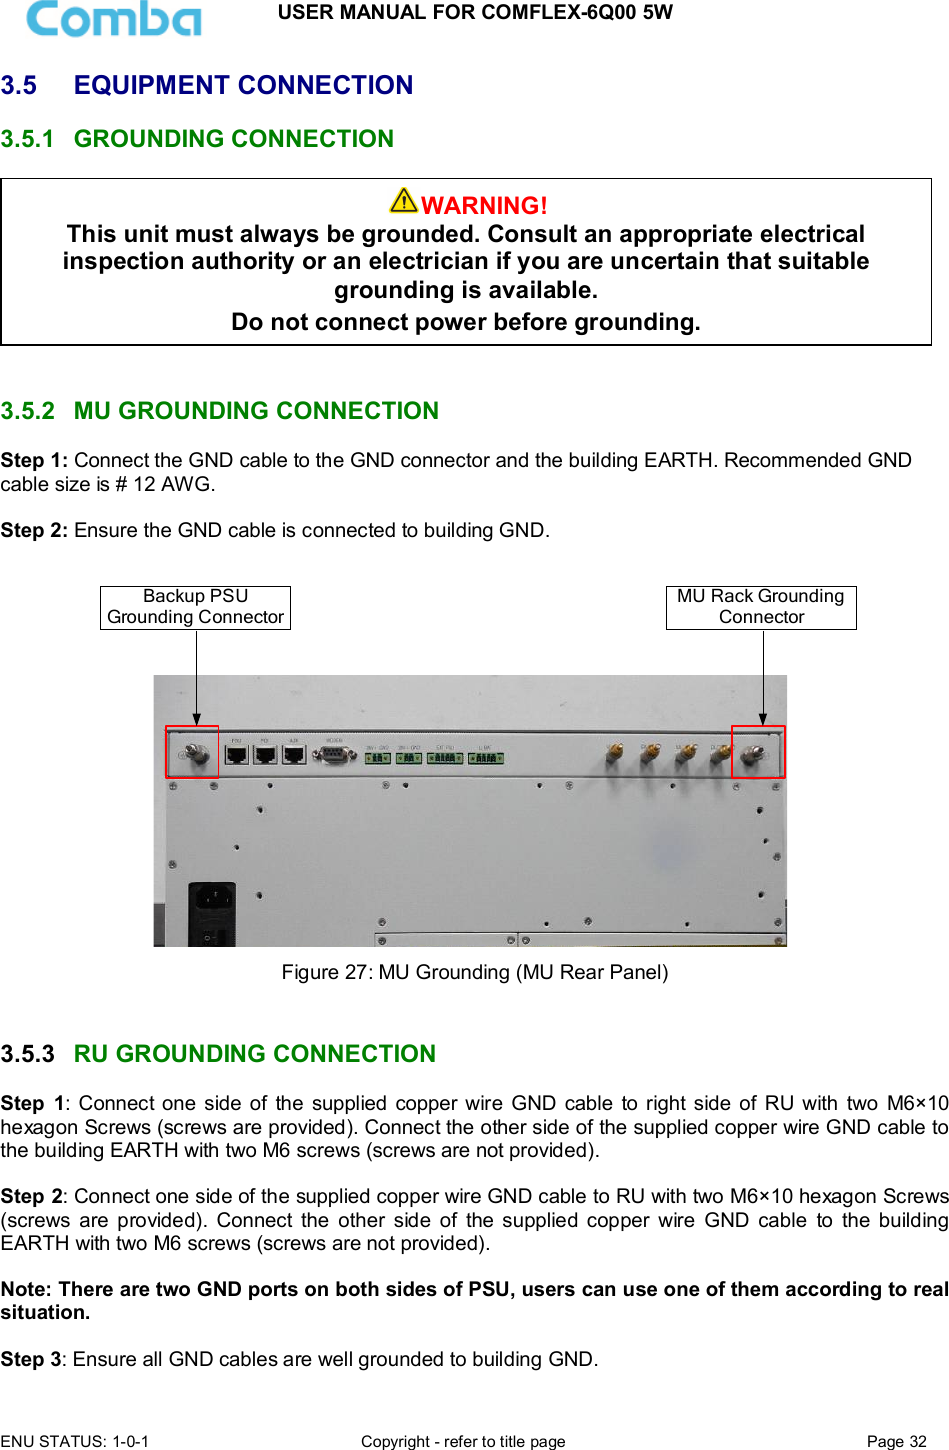 USER MANUAL FOR COMFLEX-6Q00 5W  ENU STATUS: 1-0-1  Copyright - refer to title page  Page 32      3.5  EQUIPMENT CONNECTION  3.5.1  GROUNDING CONNECTION    3.5.2  MU GROUNDING CONNECTION Step 1: Connect the GND cable to the GND connector and the building EARTH. Recommended GND cable size is # 12 AWG.  Step 2: Ensure the GND cable is connected to building GND.  Backup PSU Grounding ConnectorMU Rack Grounding Connector Figure 27: MU Grounding (MU Rear Panel)   3.5.3  RU GROUNDING CONNECTION Step  1: Connect one side of the  supplied  copper wire  GND  cable to right side of  RU with  two  M6×10 hexagon Screws (screws are provided). Connect the other side of the supplied copper wire GND cable to the building EARTH with two M6 screws (screws are not provided).  Step 2: Connect one side of the supplied copper wire GND cable to RU with two M6×10 hexagon Screws (screws  are  provided).  Connect  the  other  side  of  the  supplied  copper  wire  GND  cable  to  the  building EARTH with two M6 screws (screws are not provided).  Note: There are two GND ports on both sides of PSU, users can use one of them according to real situation.  Step 3: Ensure all GND cables are well grounded to building GND. WARNING! This unit must always be grounded. Consult an appropriate electrical inspection authority or an electrician if you are uncertain that suitable grounding is available.   Do not connect power before grounding. 